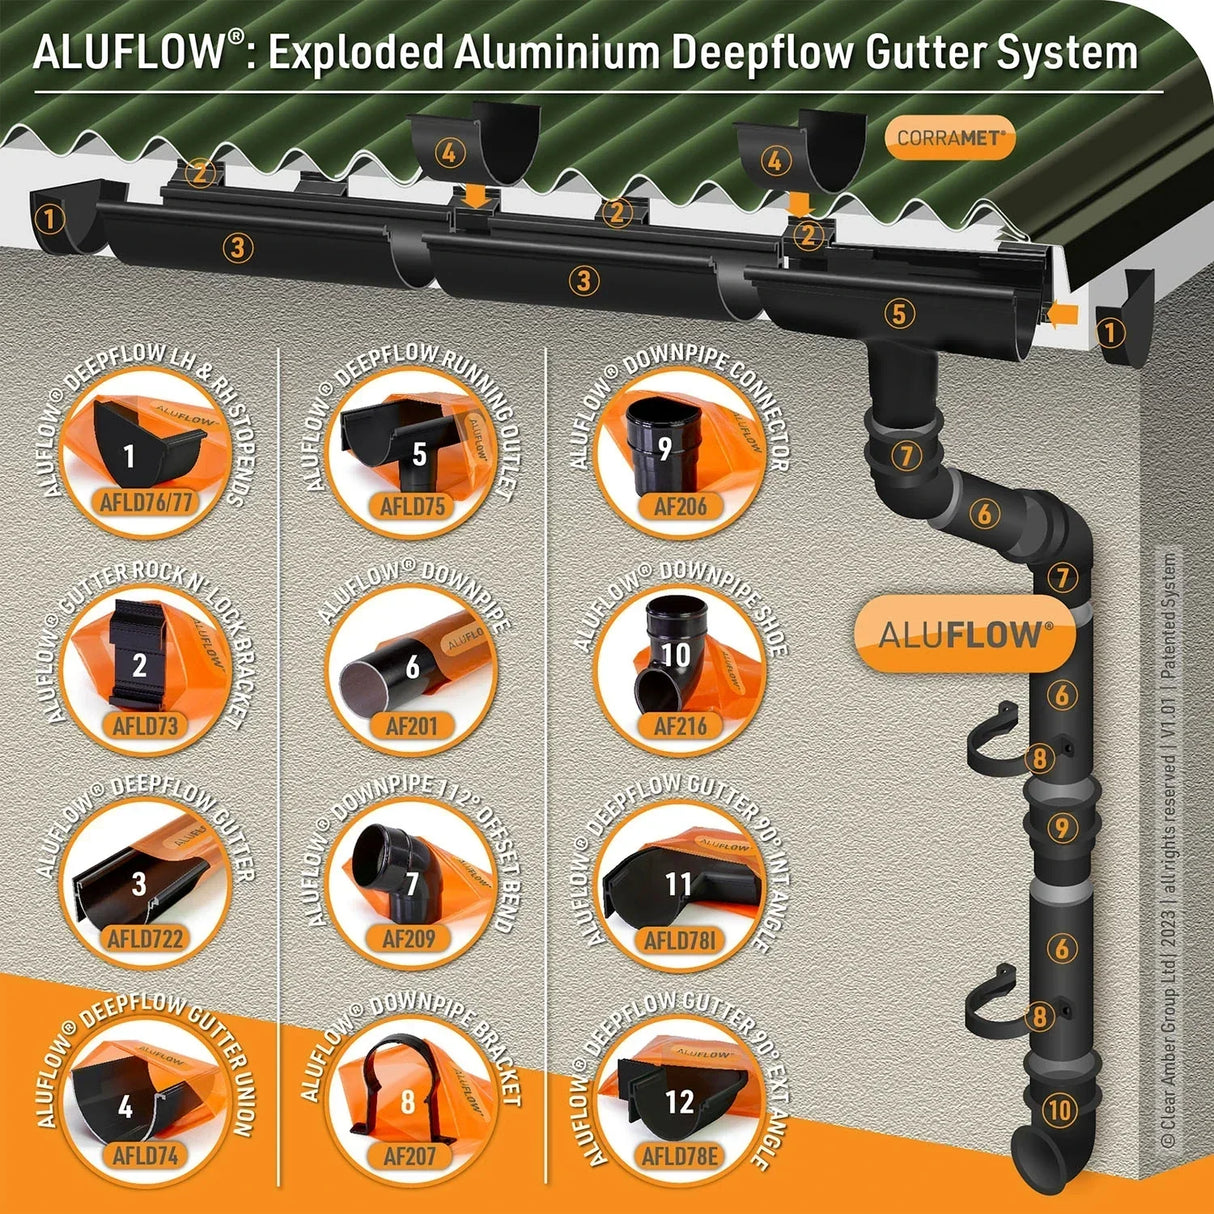 Aluflow System downpipe, guttering and connectors and accessories - how they fit together